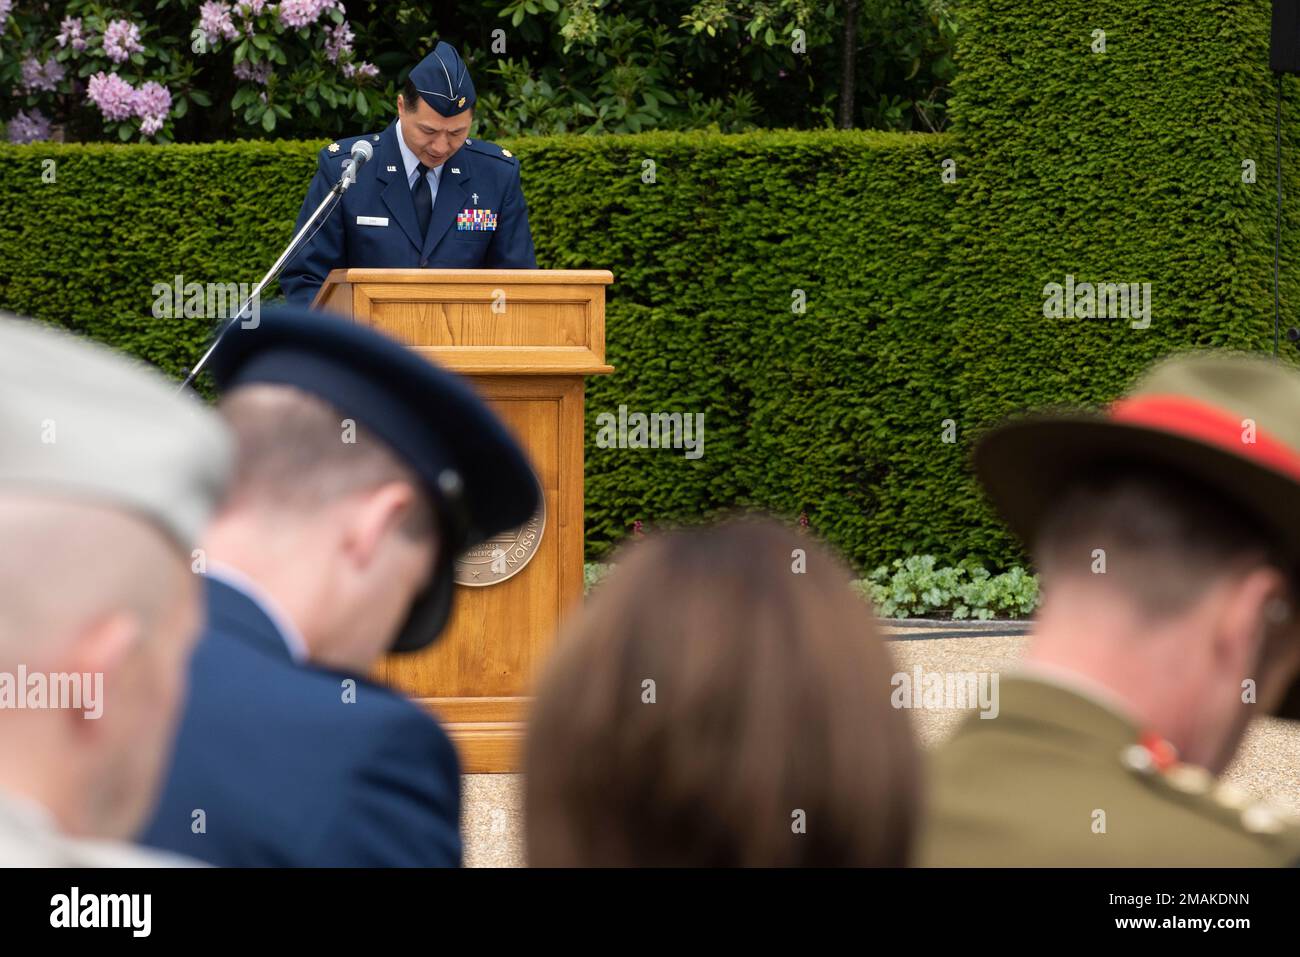 U.S. Air Force Chaplain Maj. Myung Cho, 501st Combat Support Wing deputy wing chaplain, leads an invocation during a Memorial Day ceremony at the Brookwood American Cemetery, England, May 29, 2022. Memorial Day provides us a solemn opportunity to remember our fallen brothers and sisters in arms, reflect upon their courageous sacrifice, and show gratitude for the freedom they gave their lives to defend. It also affords us the opportunity to pay homage to those families who lost their loved ones in service to the Nation-and continue to feel the full weight of that sacrifice today. Stock Photo